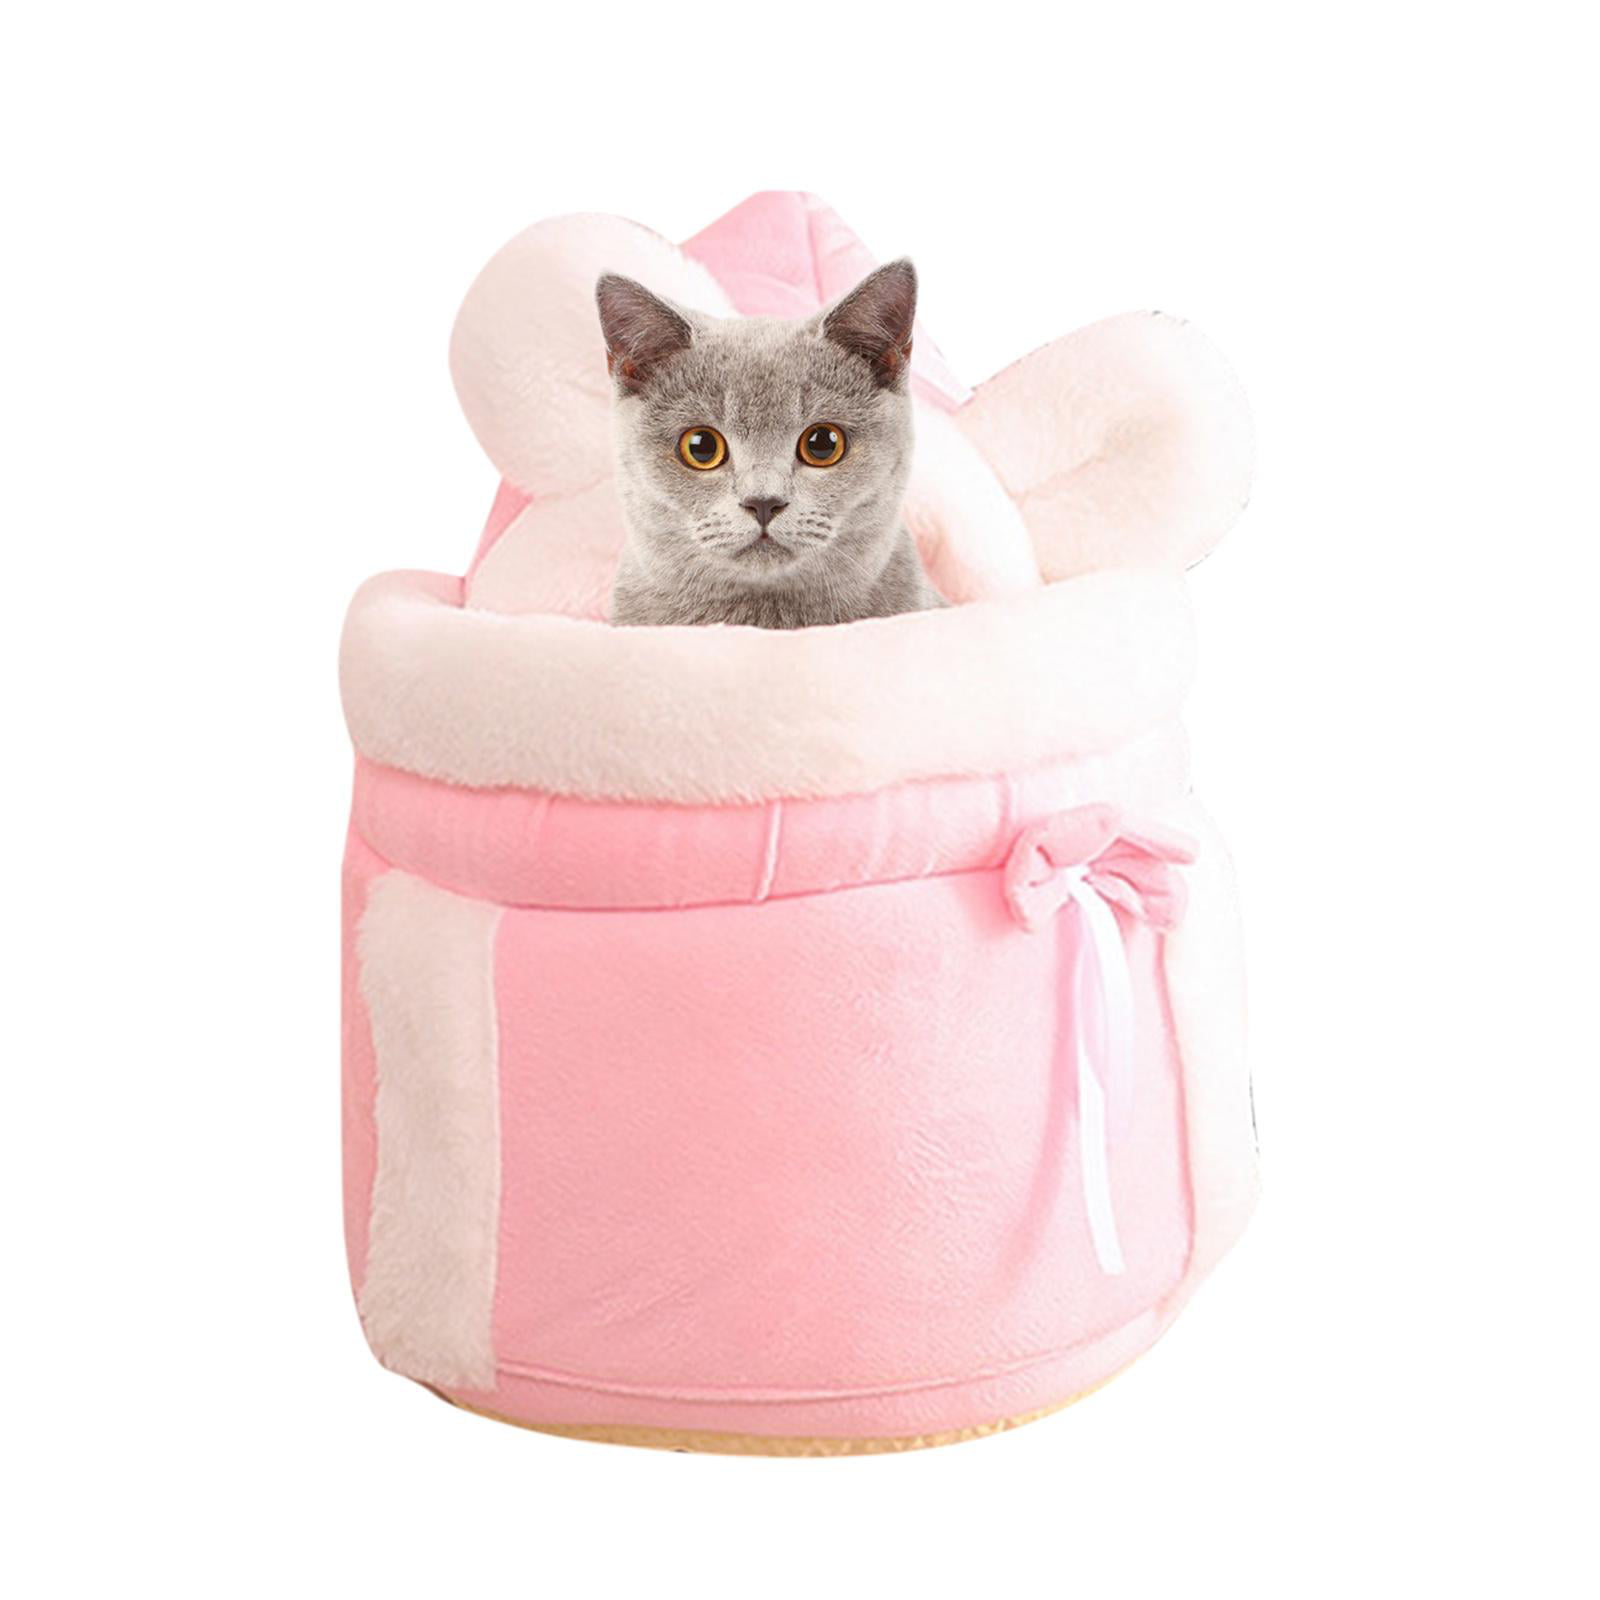 NC Portable Pet Cats Carrier Bag Warm Flannel Dogs Puppy Walking Vet Visits Carrying Sightseeing Pets Rabbit Cage Grey M